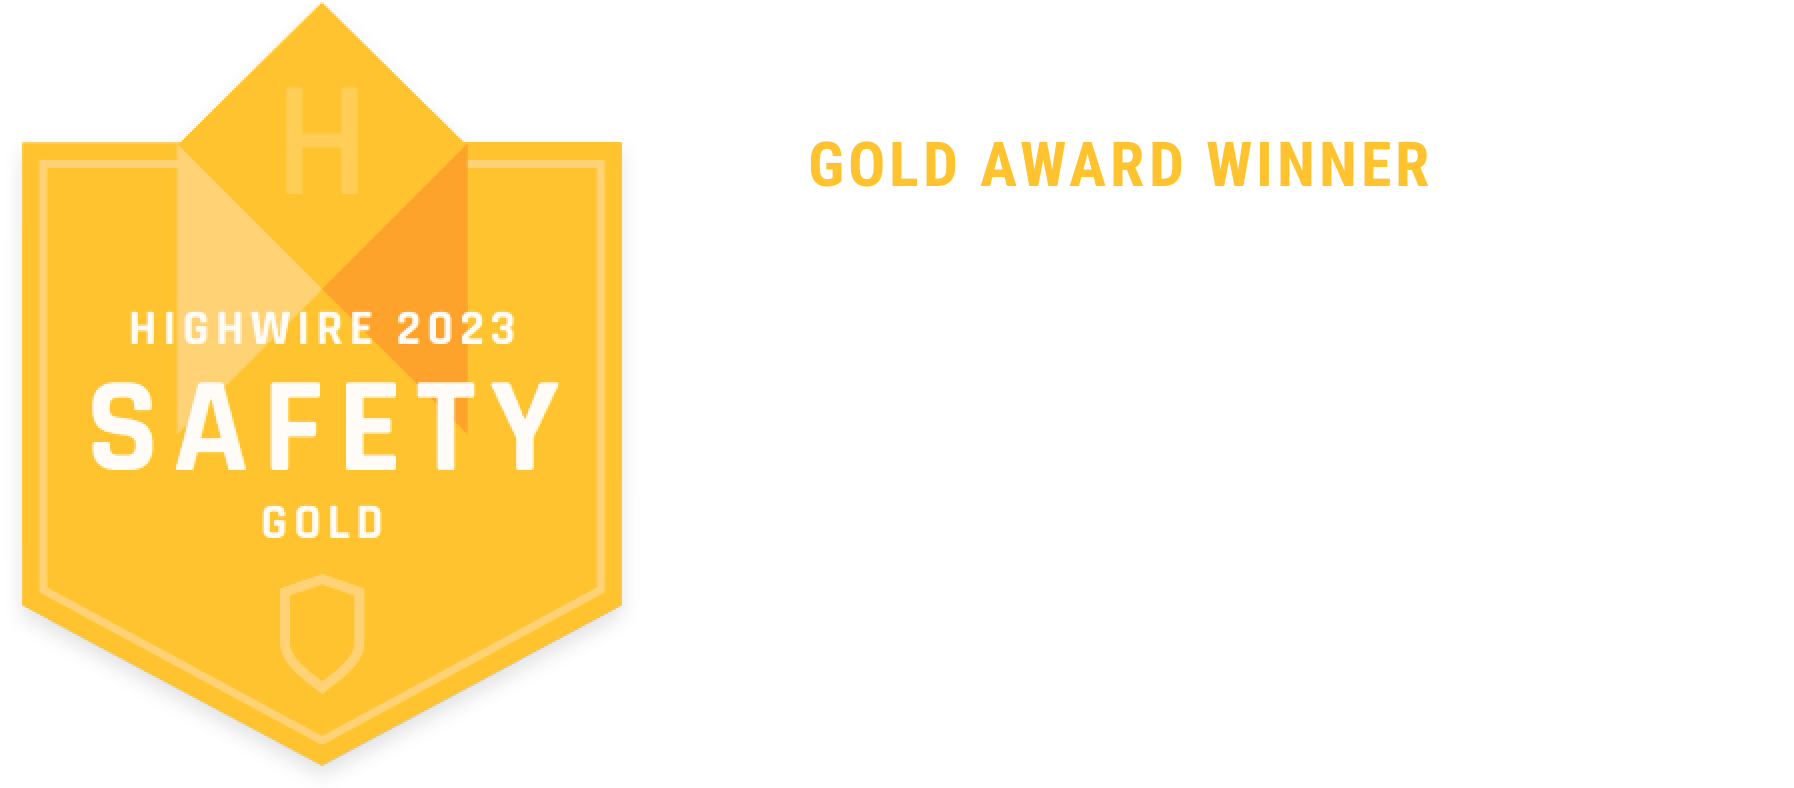 McVac was named one of Highwire's Safest Contractors and Vendors for 2023